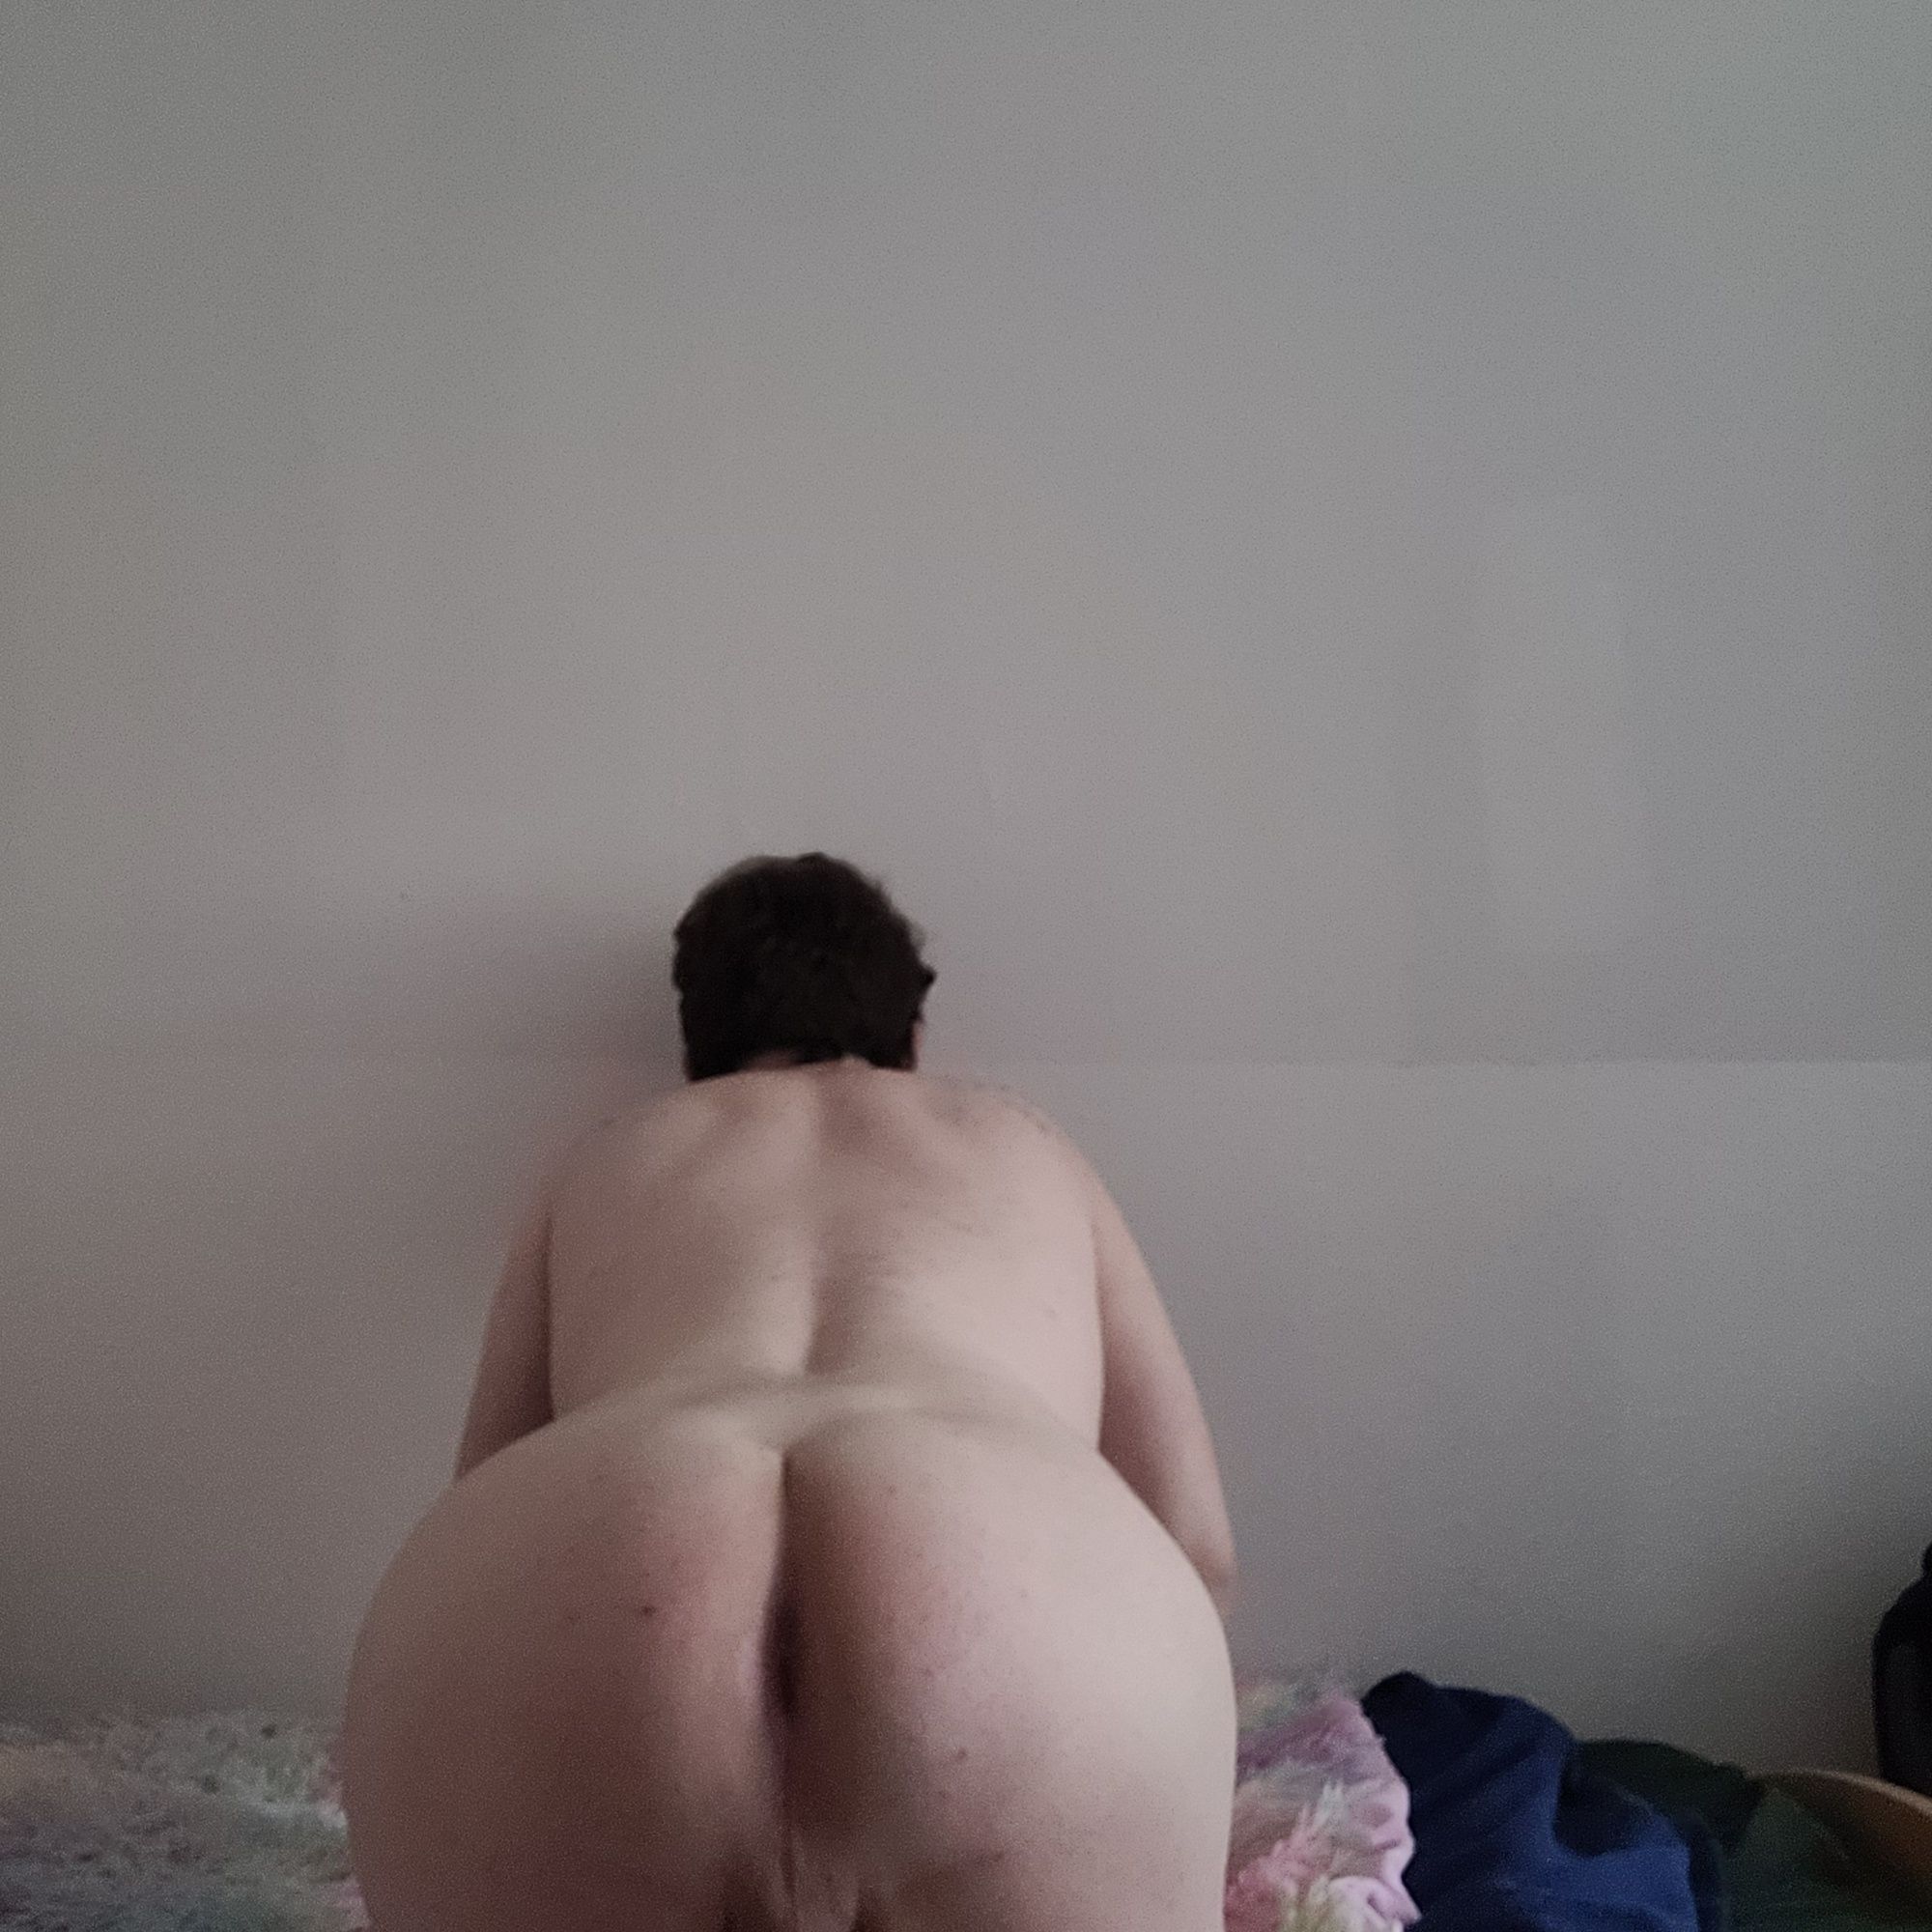 just me naked #2 #7